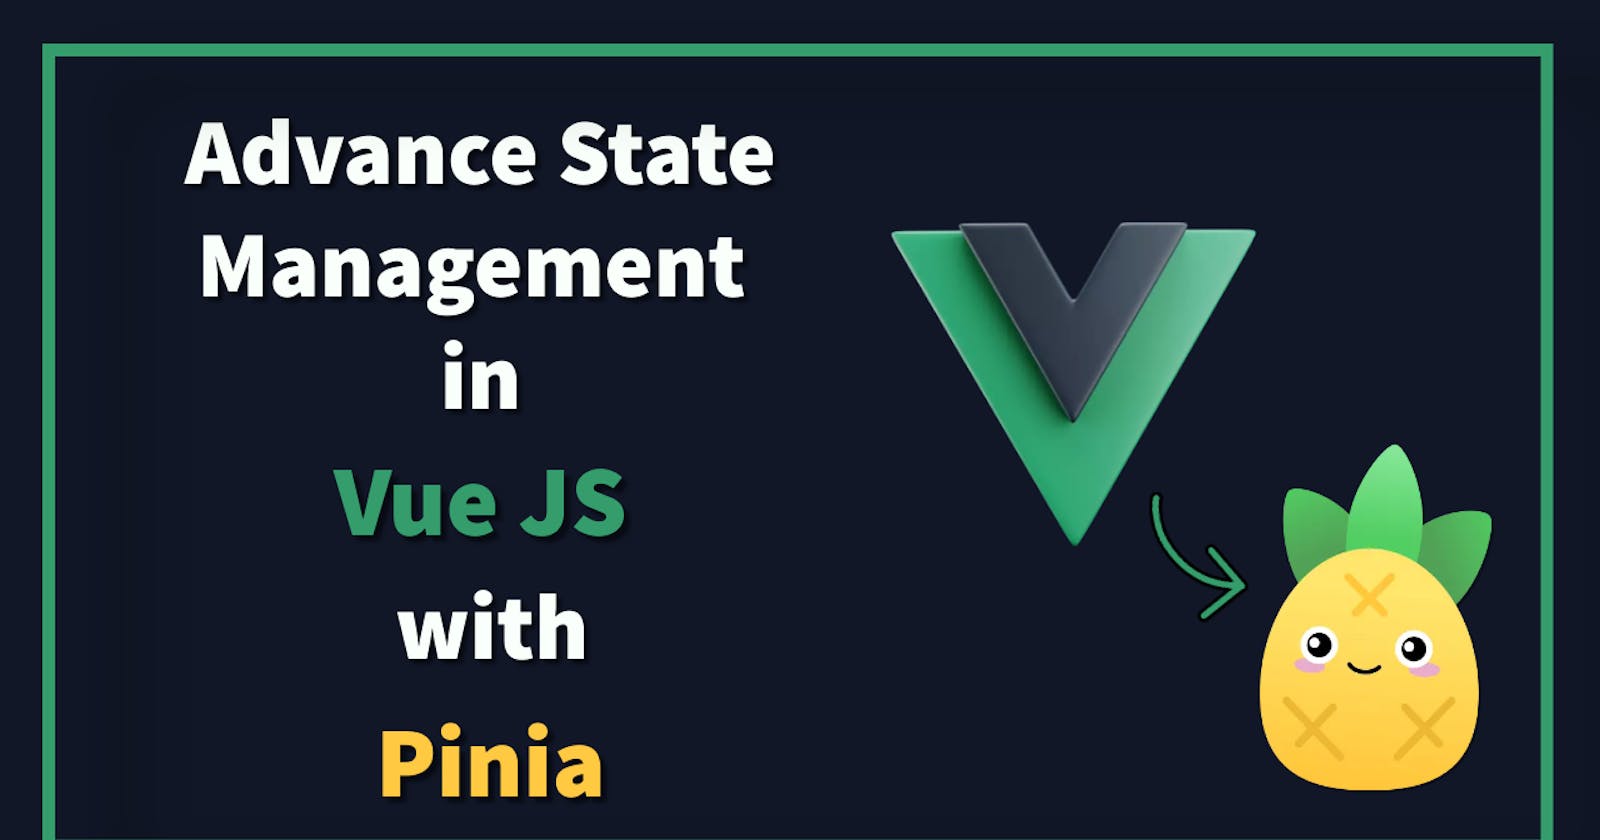 Advance State Management in Vue Js with Pinia